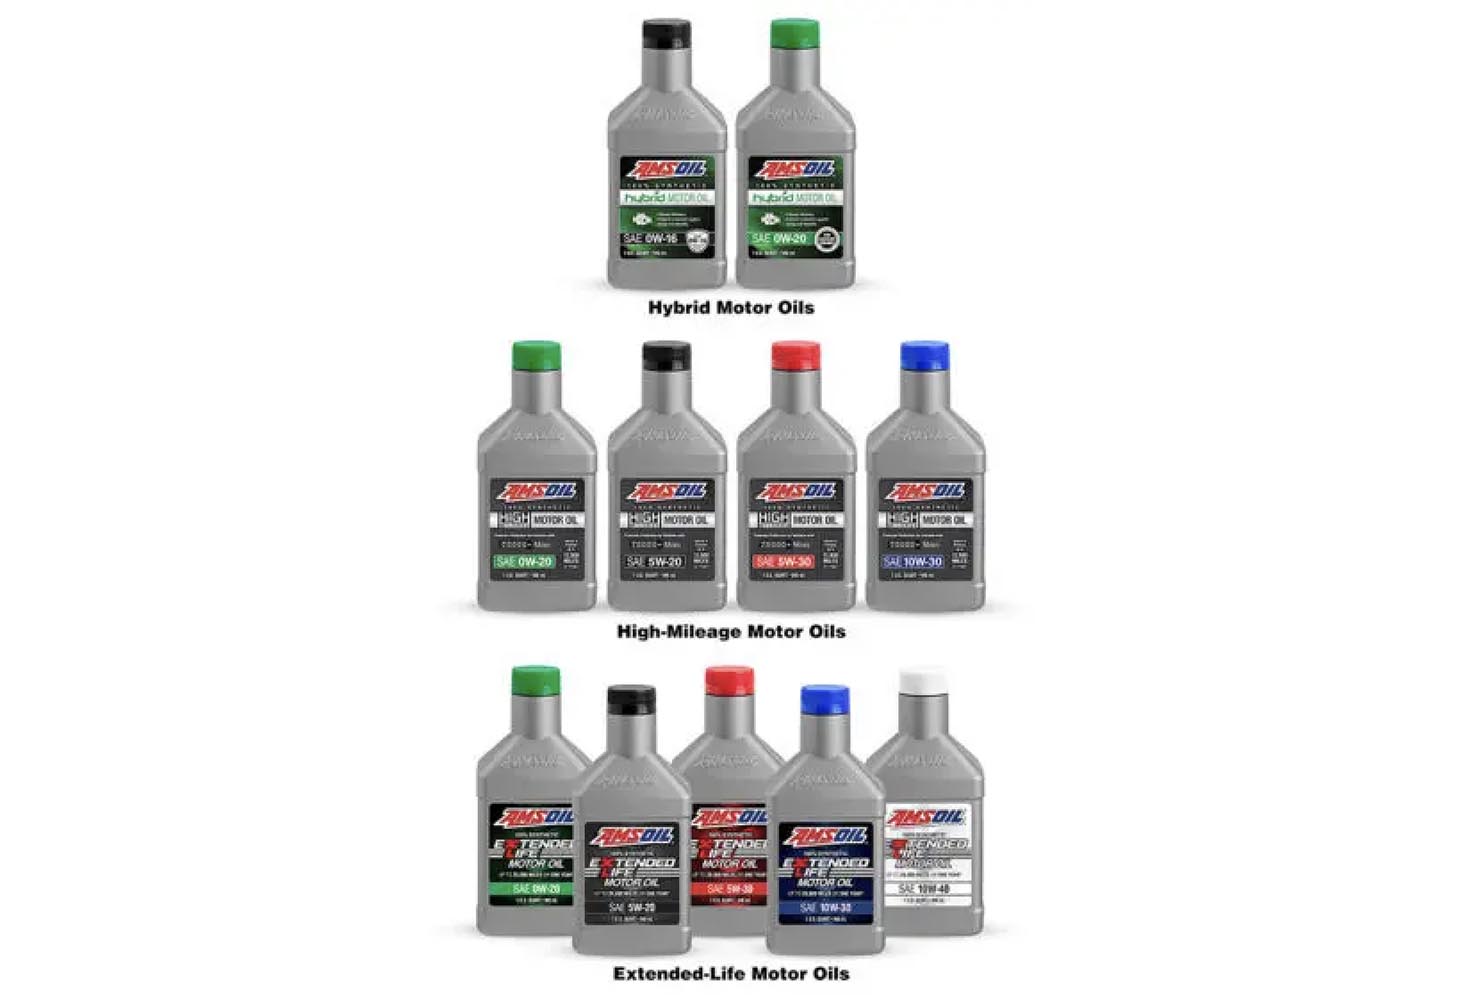 AMSOIL introduces 3 new motor oil product lines